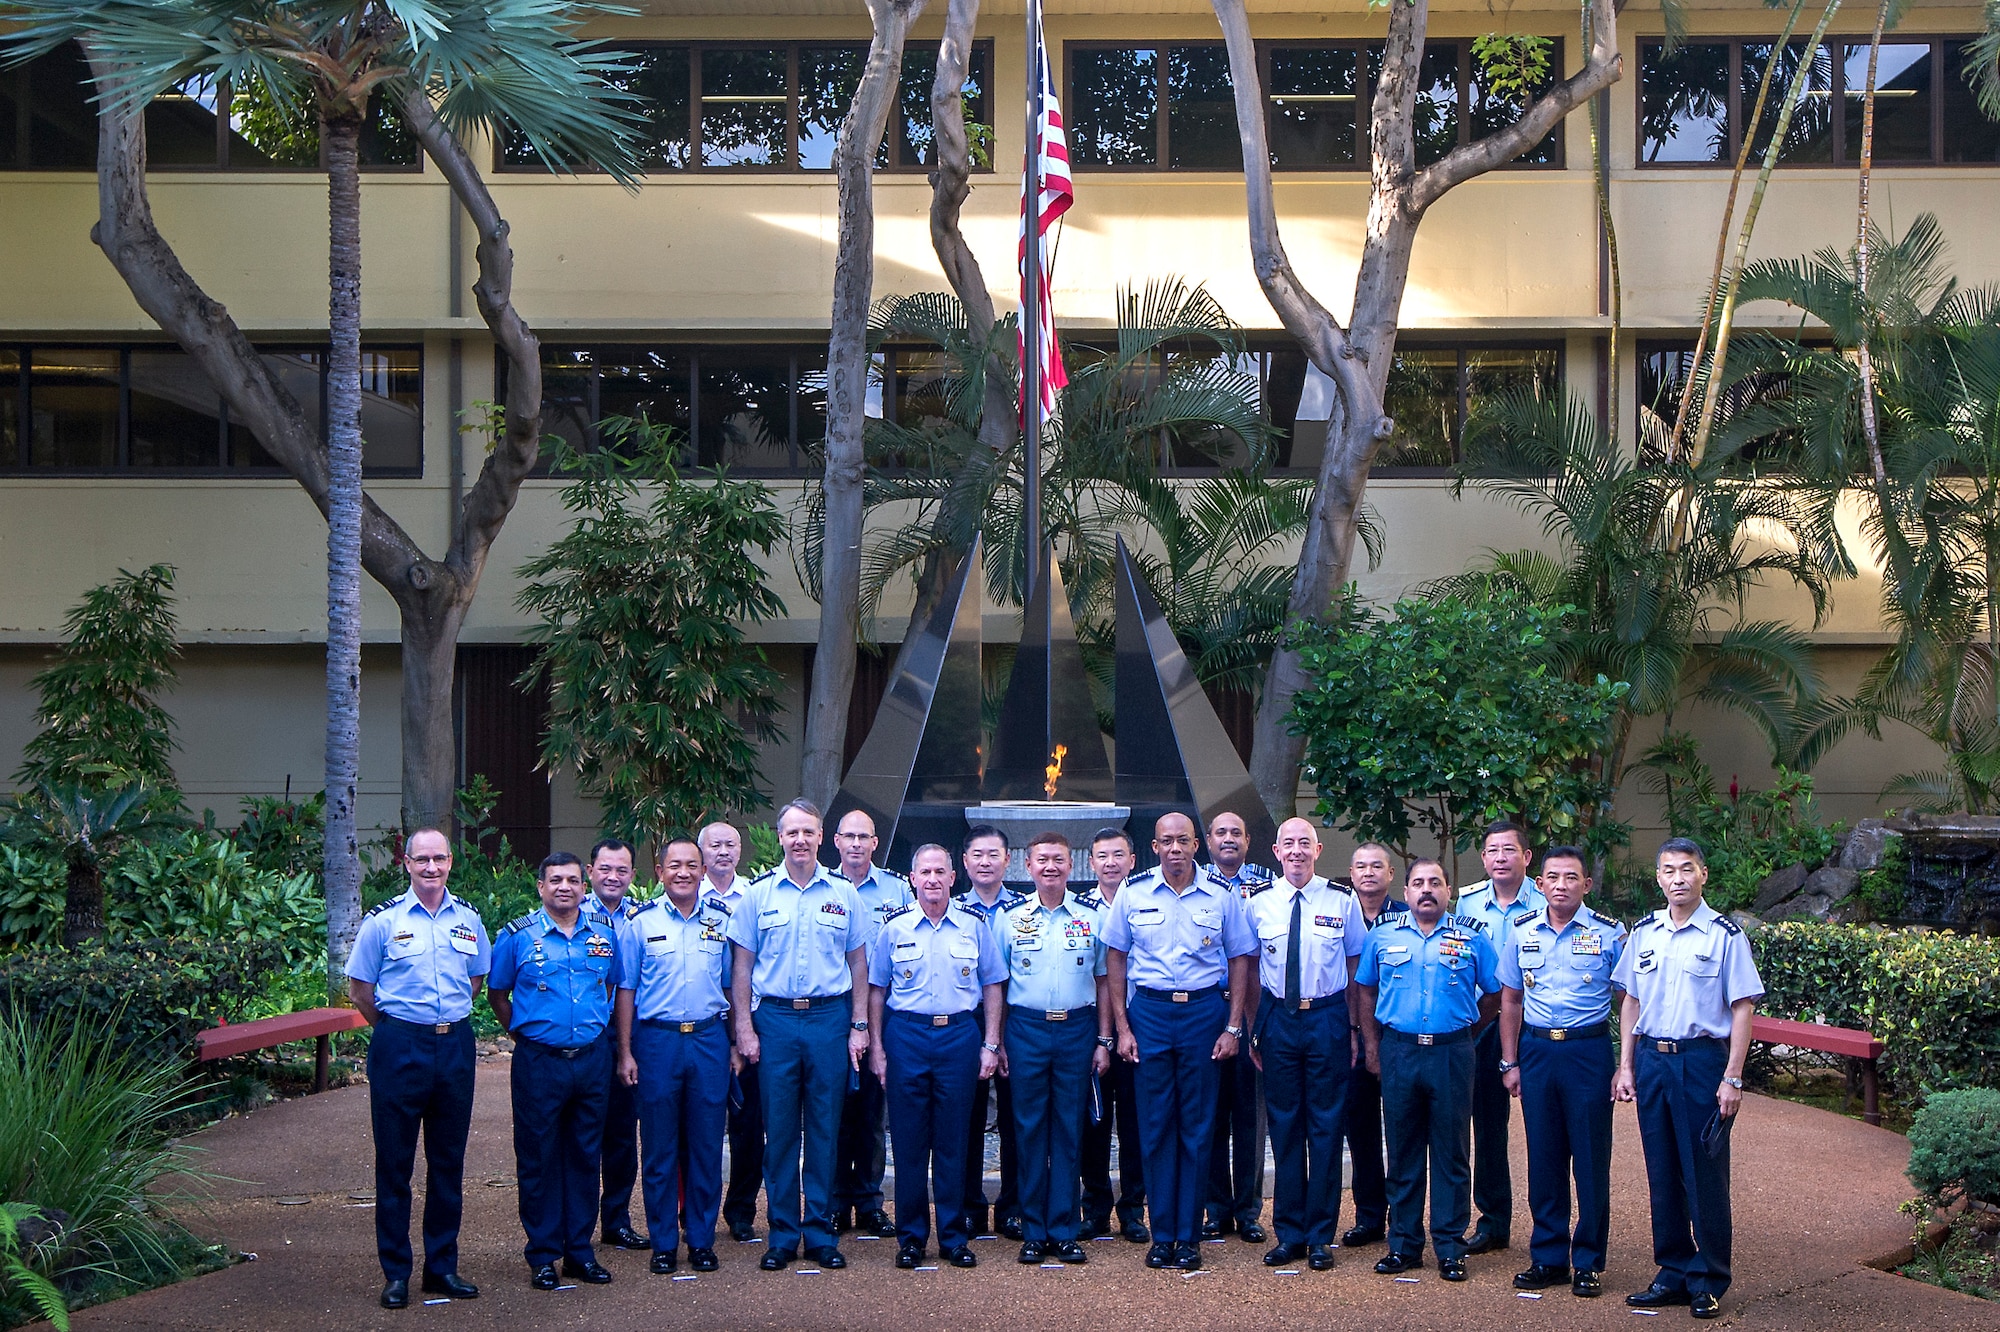 Air chiefs from across the Indo-Pacific pose for a group photo during the 2019 Pacific Air Chiefs Symposium on Joint Base Pearl Harbor-Hickam, Hawaii, Dec. 5, 2019.